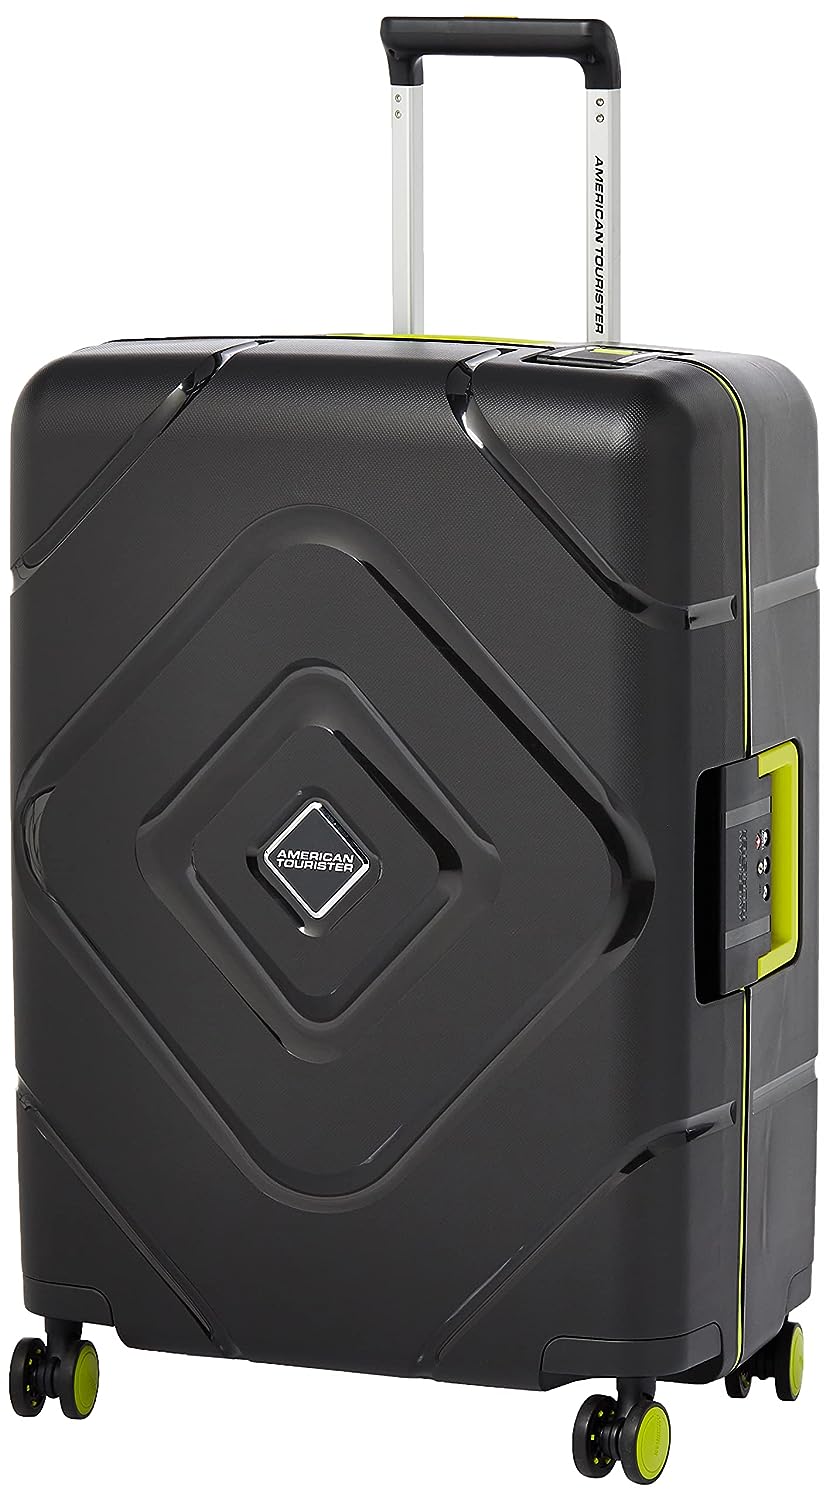 American Tourister Large Check in Luggage 79cm | Travelling Bags | Home Appliances | Halabh.com